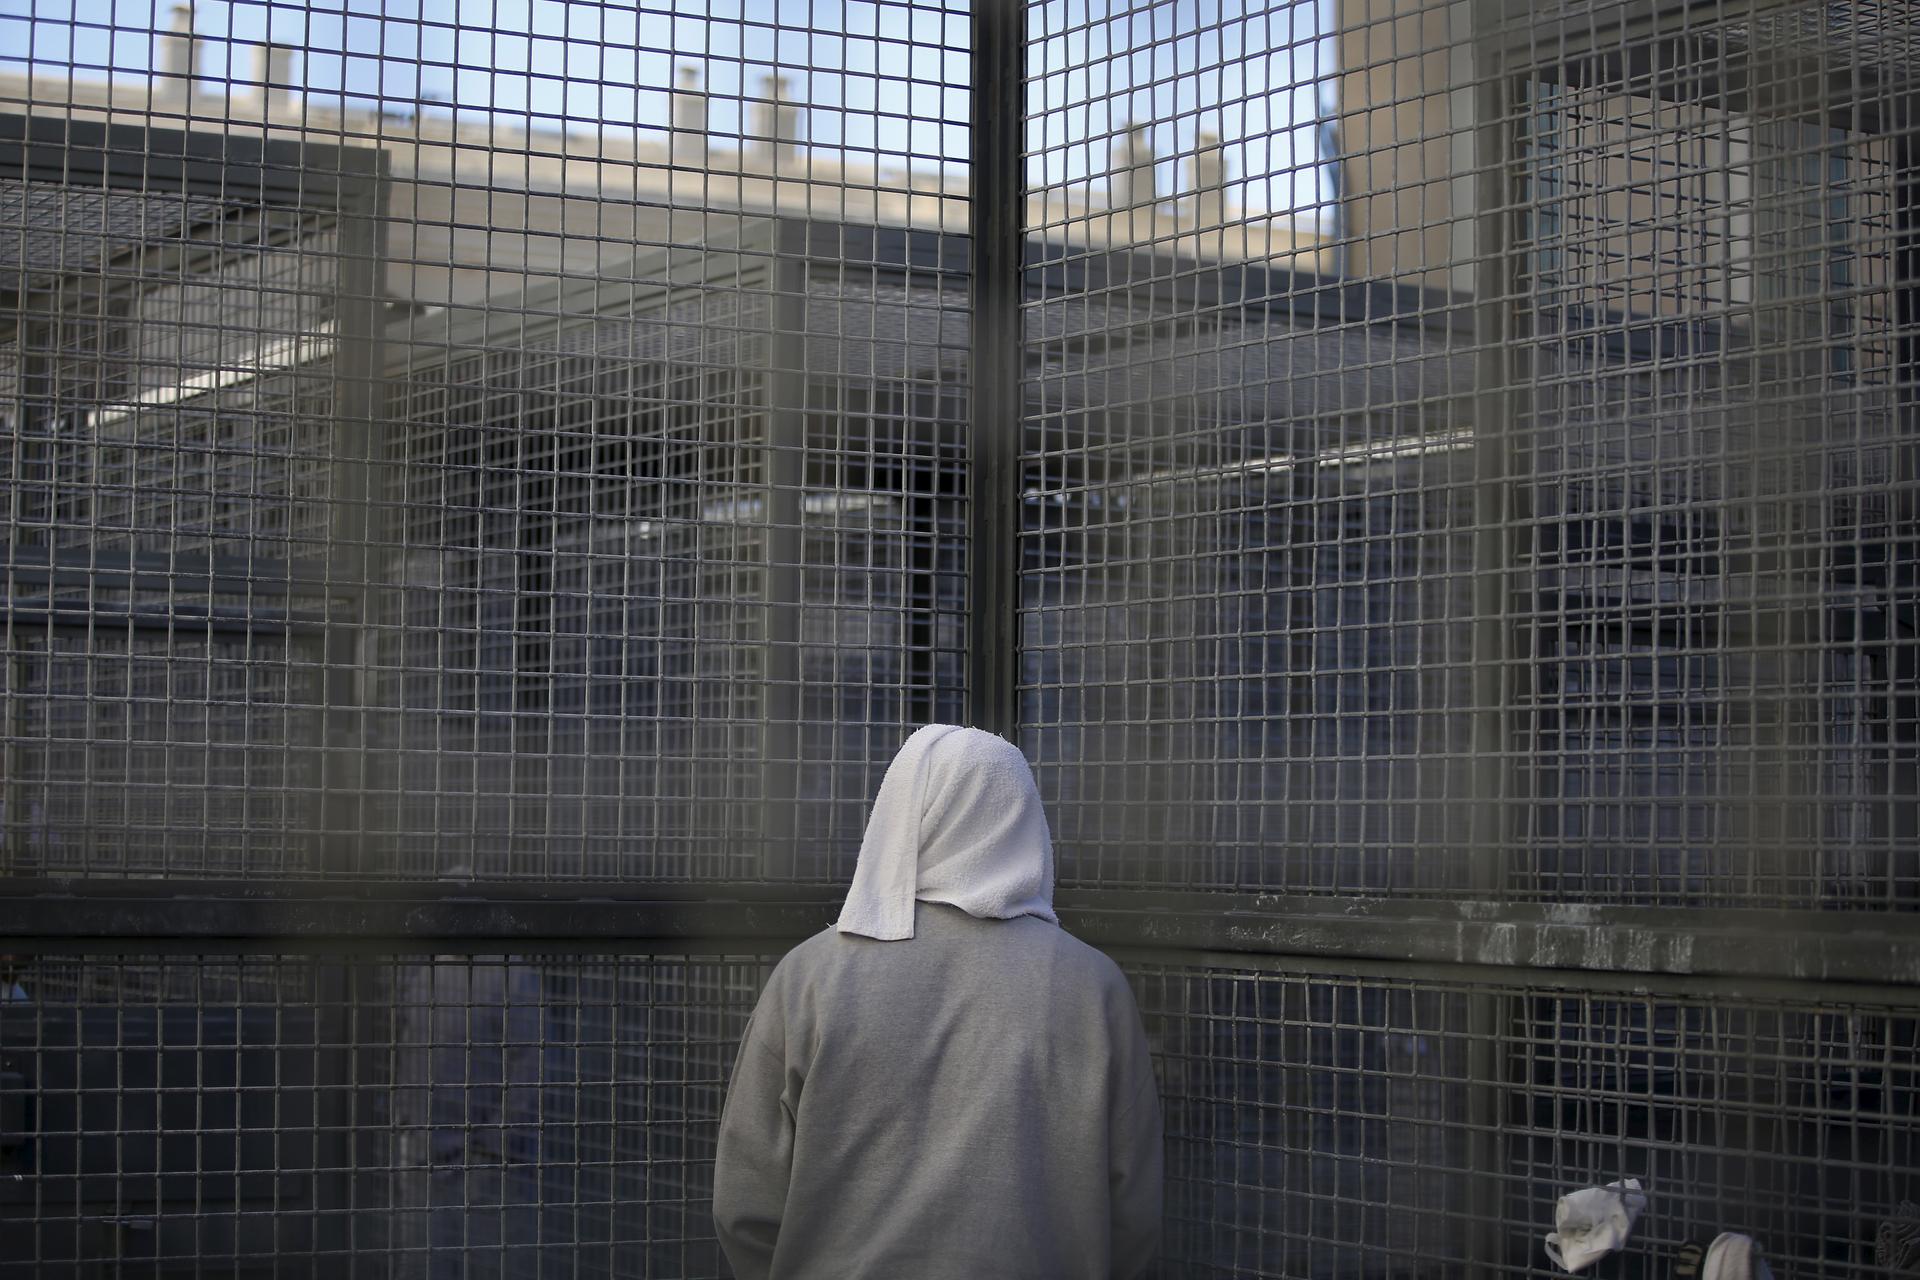 An inmate stands against a fence at the Adjustment Center yard during a media tour of California's death row at San Quentin State Prison, California, December 2015.